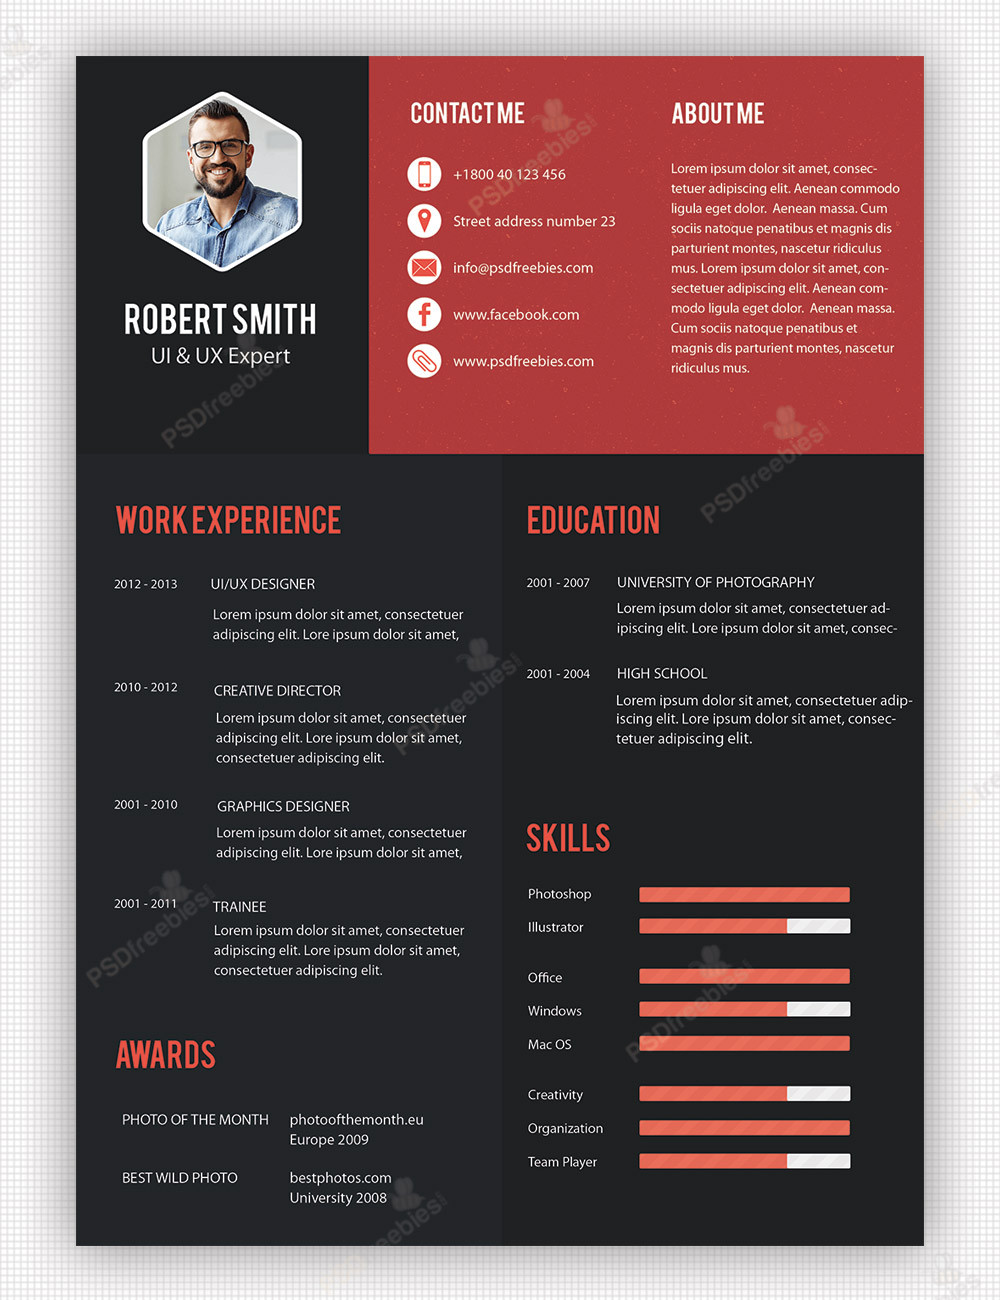 Best Resume Templates for Free Download Creative Professional Resume Template Free Psd â Psdfreebies.com